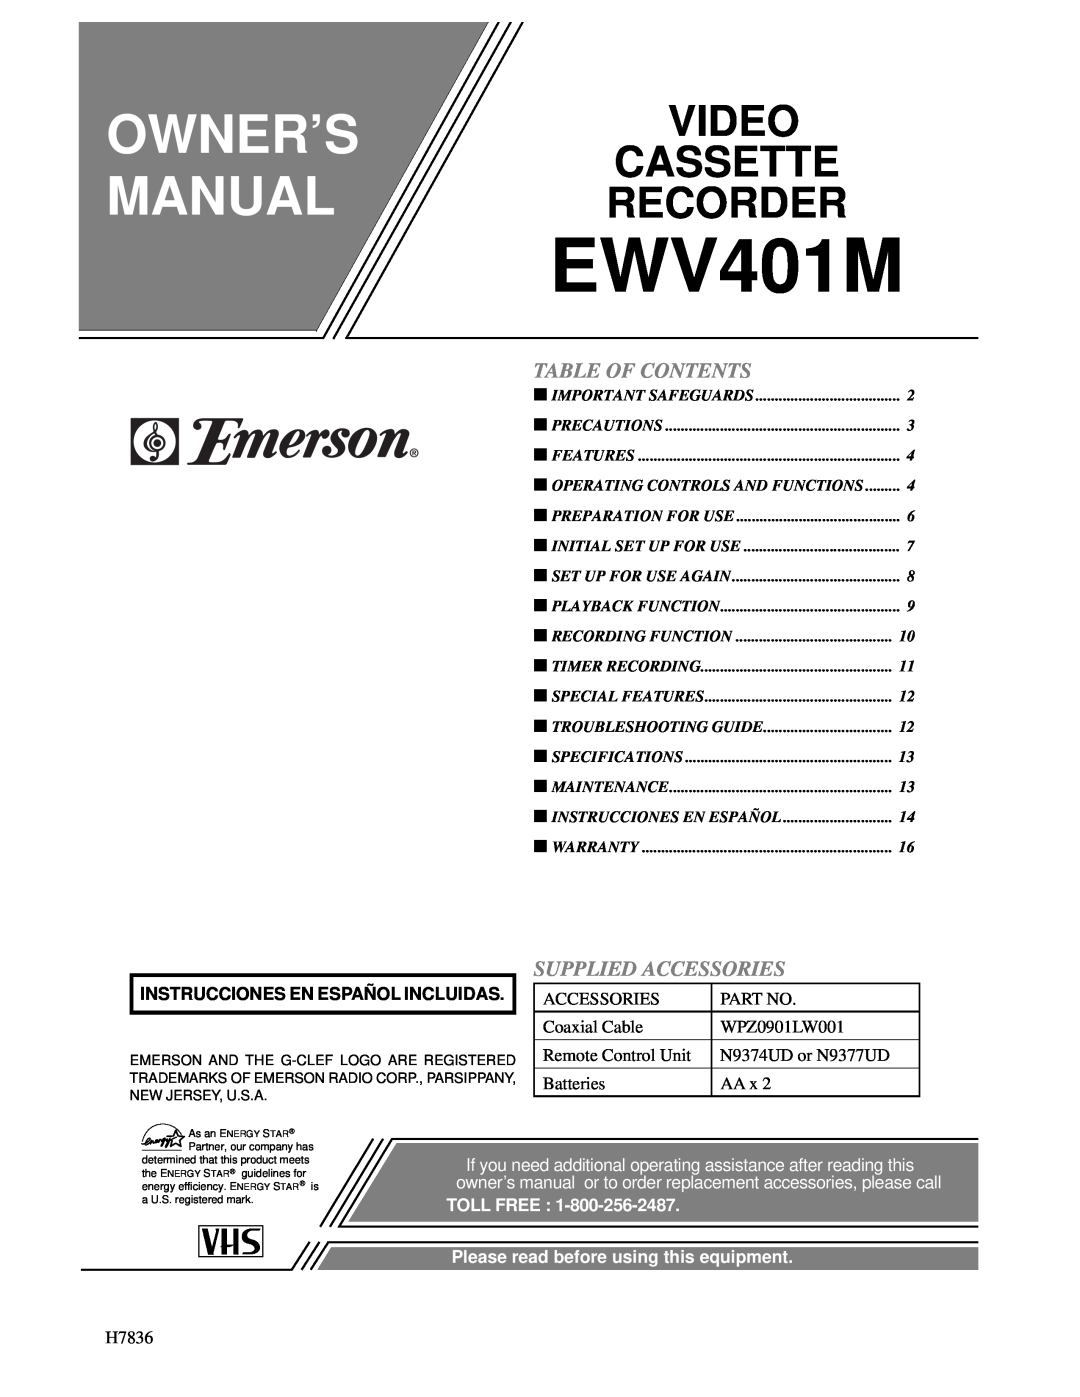 Emerson EWV401M owner manual Table Of Contents, Supplied Accessories, Owner’S Manual, Video Cassette Recorder, Toll Free 